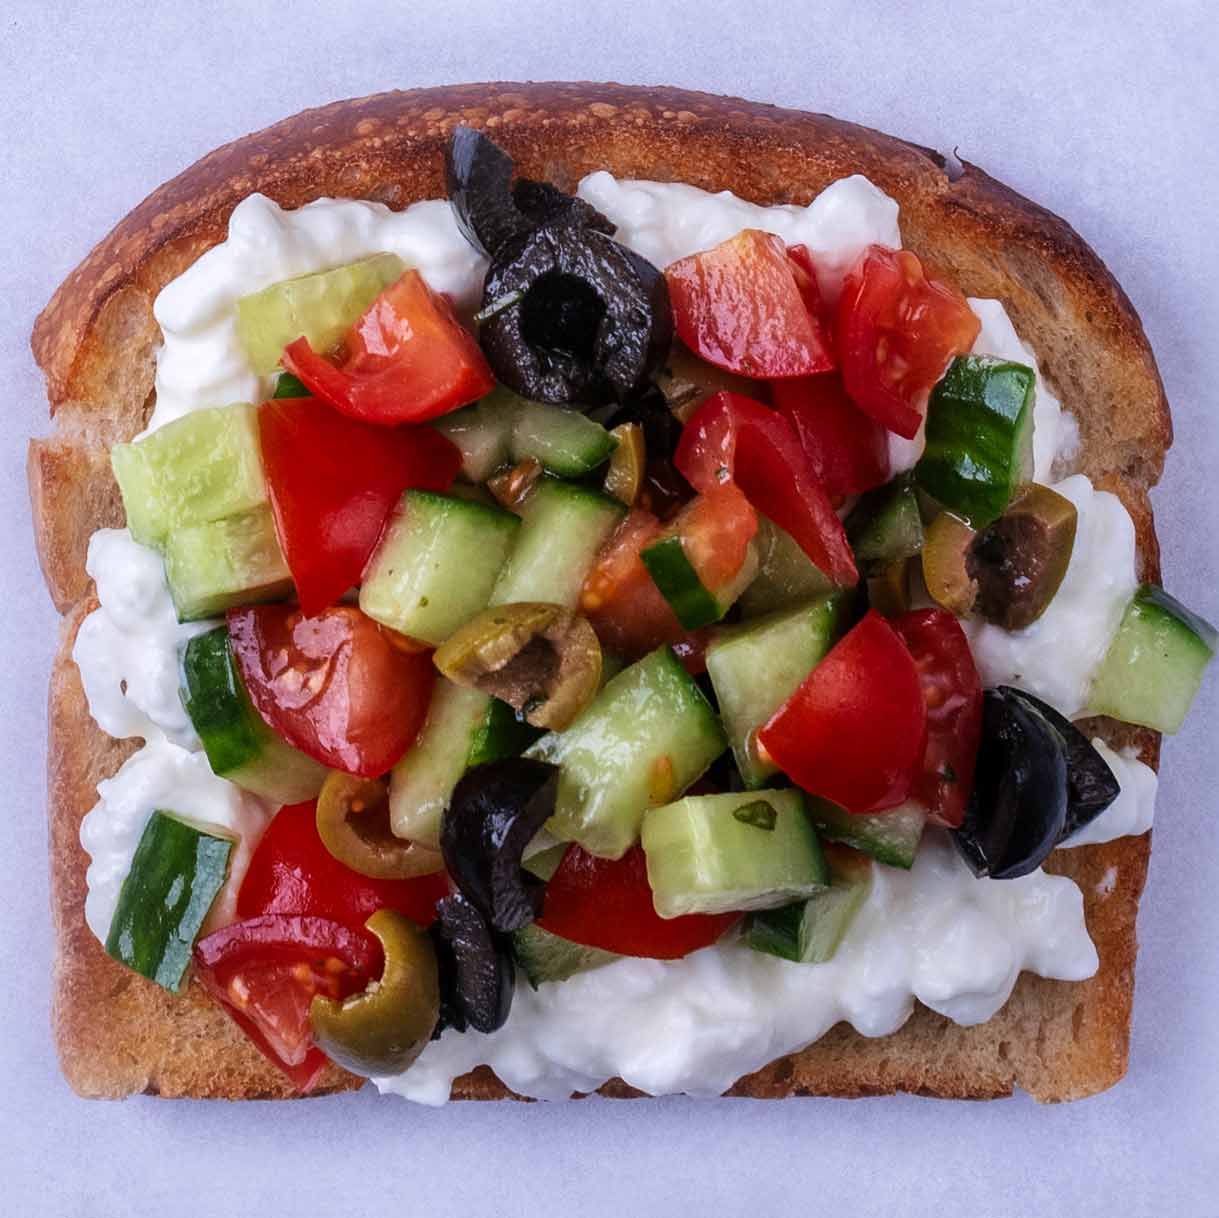 Chopped tomato, cucumber and olives on top of cottage cheese on toast.